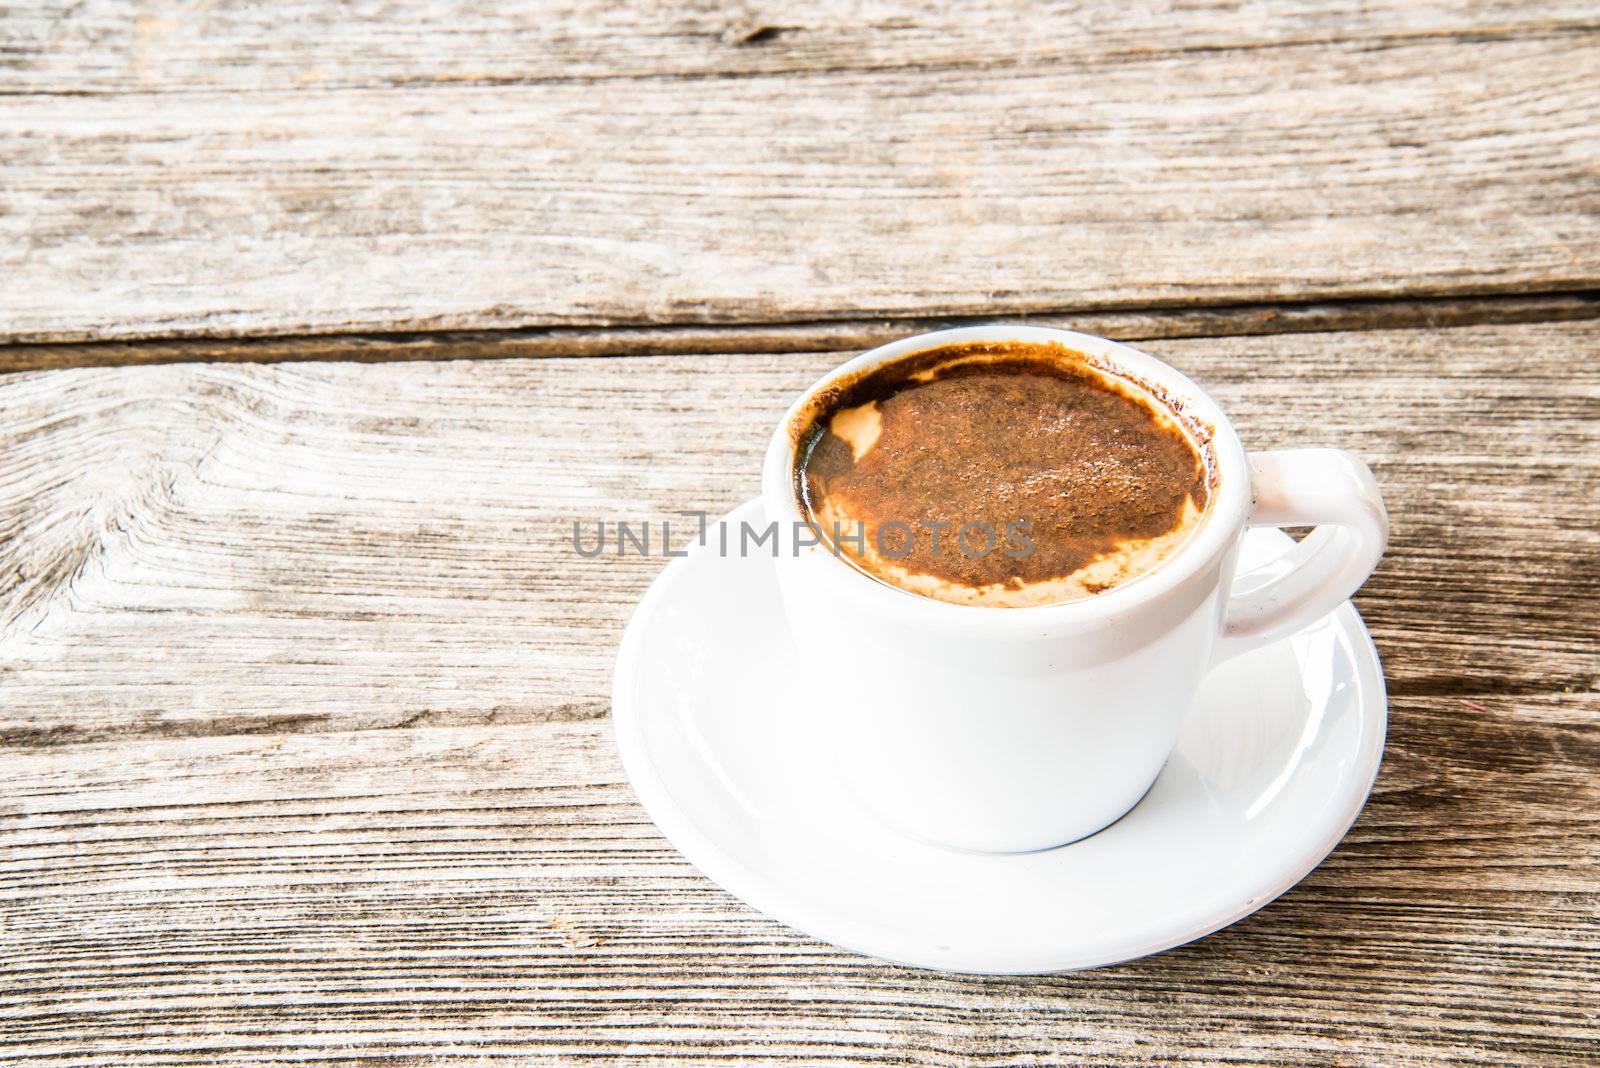 hot coffee cup on wooden table on brown background